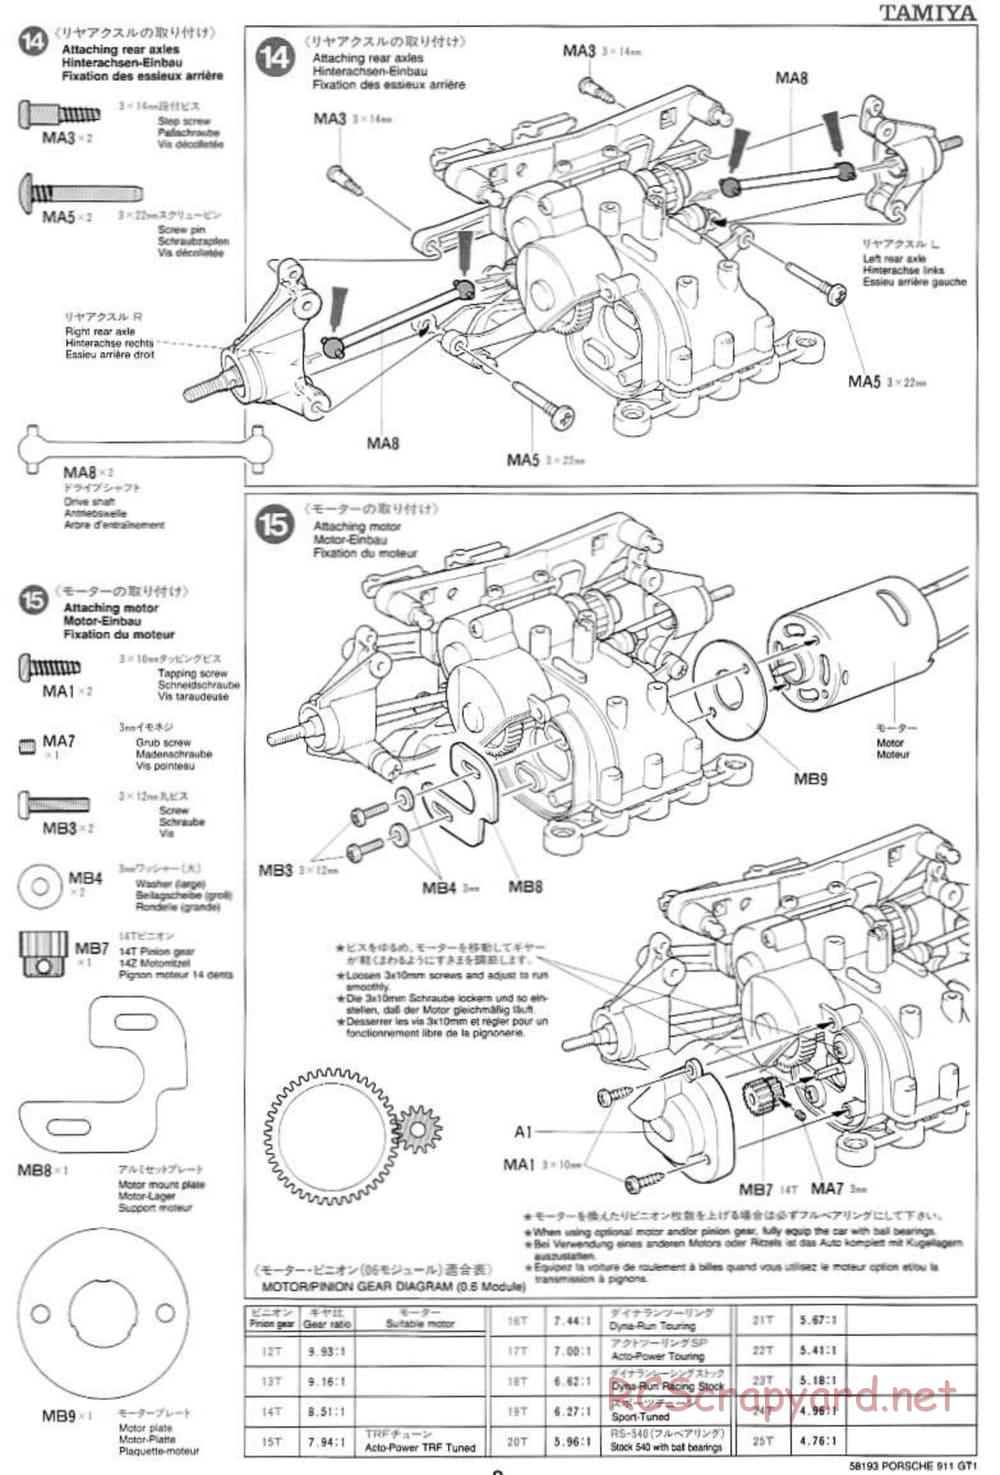 Tamiya - Porsche 911 GT1 - TA-03RS Chassis - Manual - Page 9